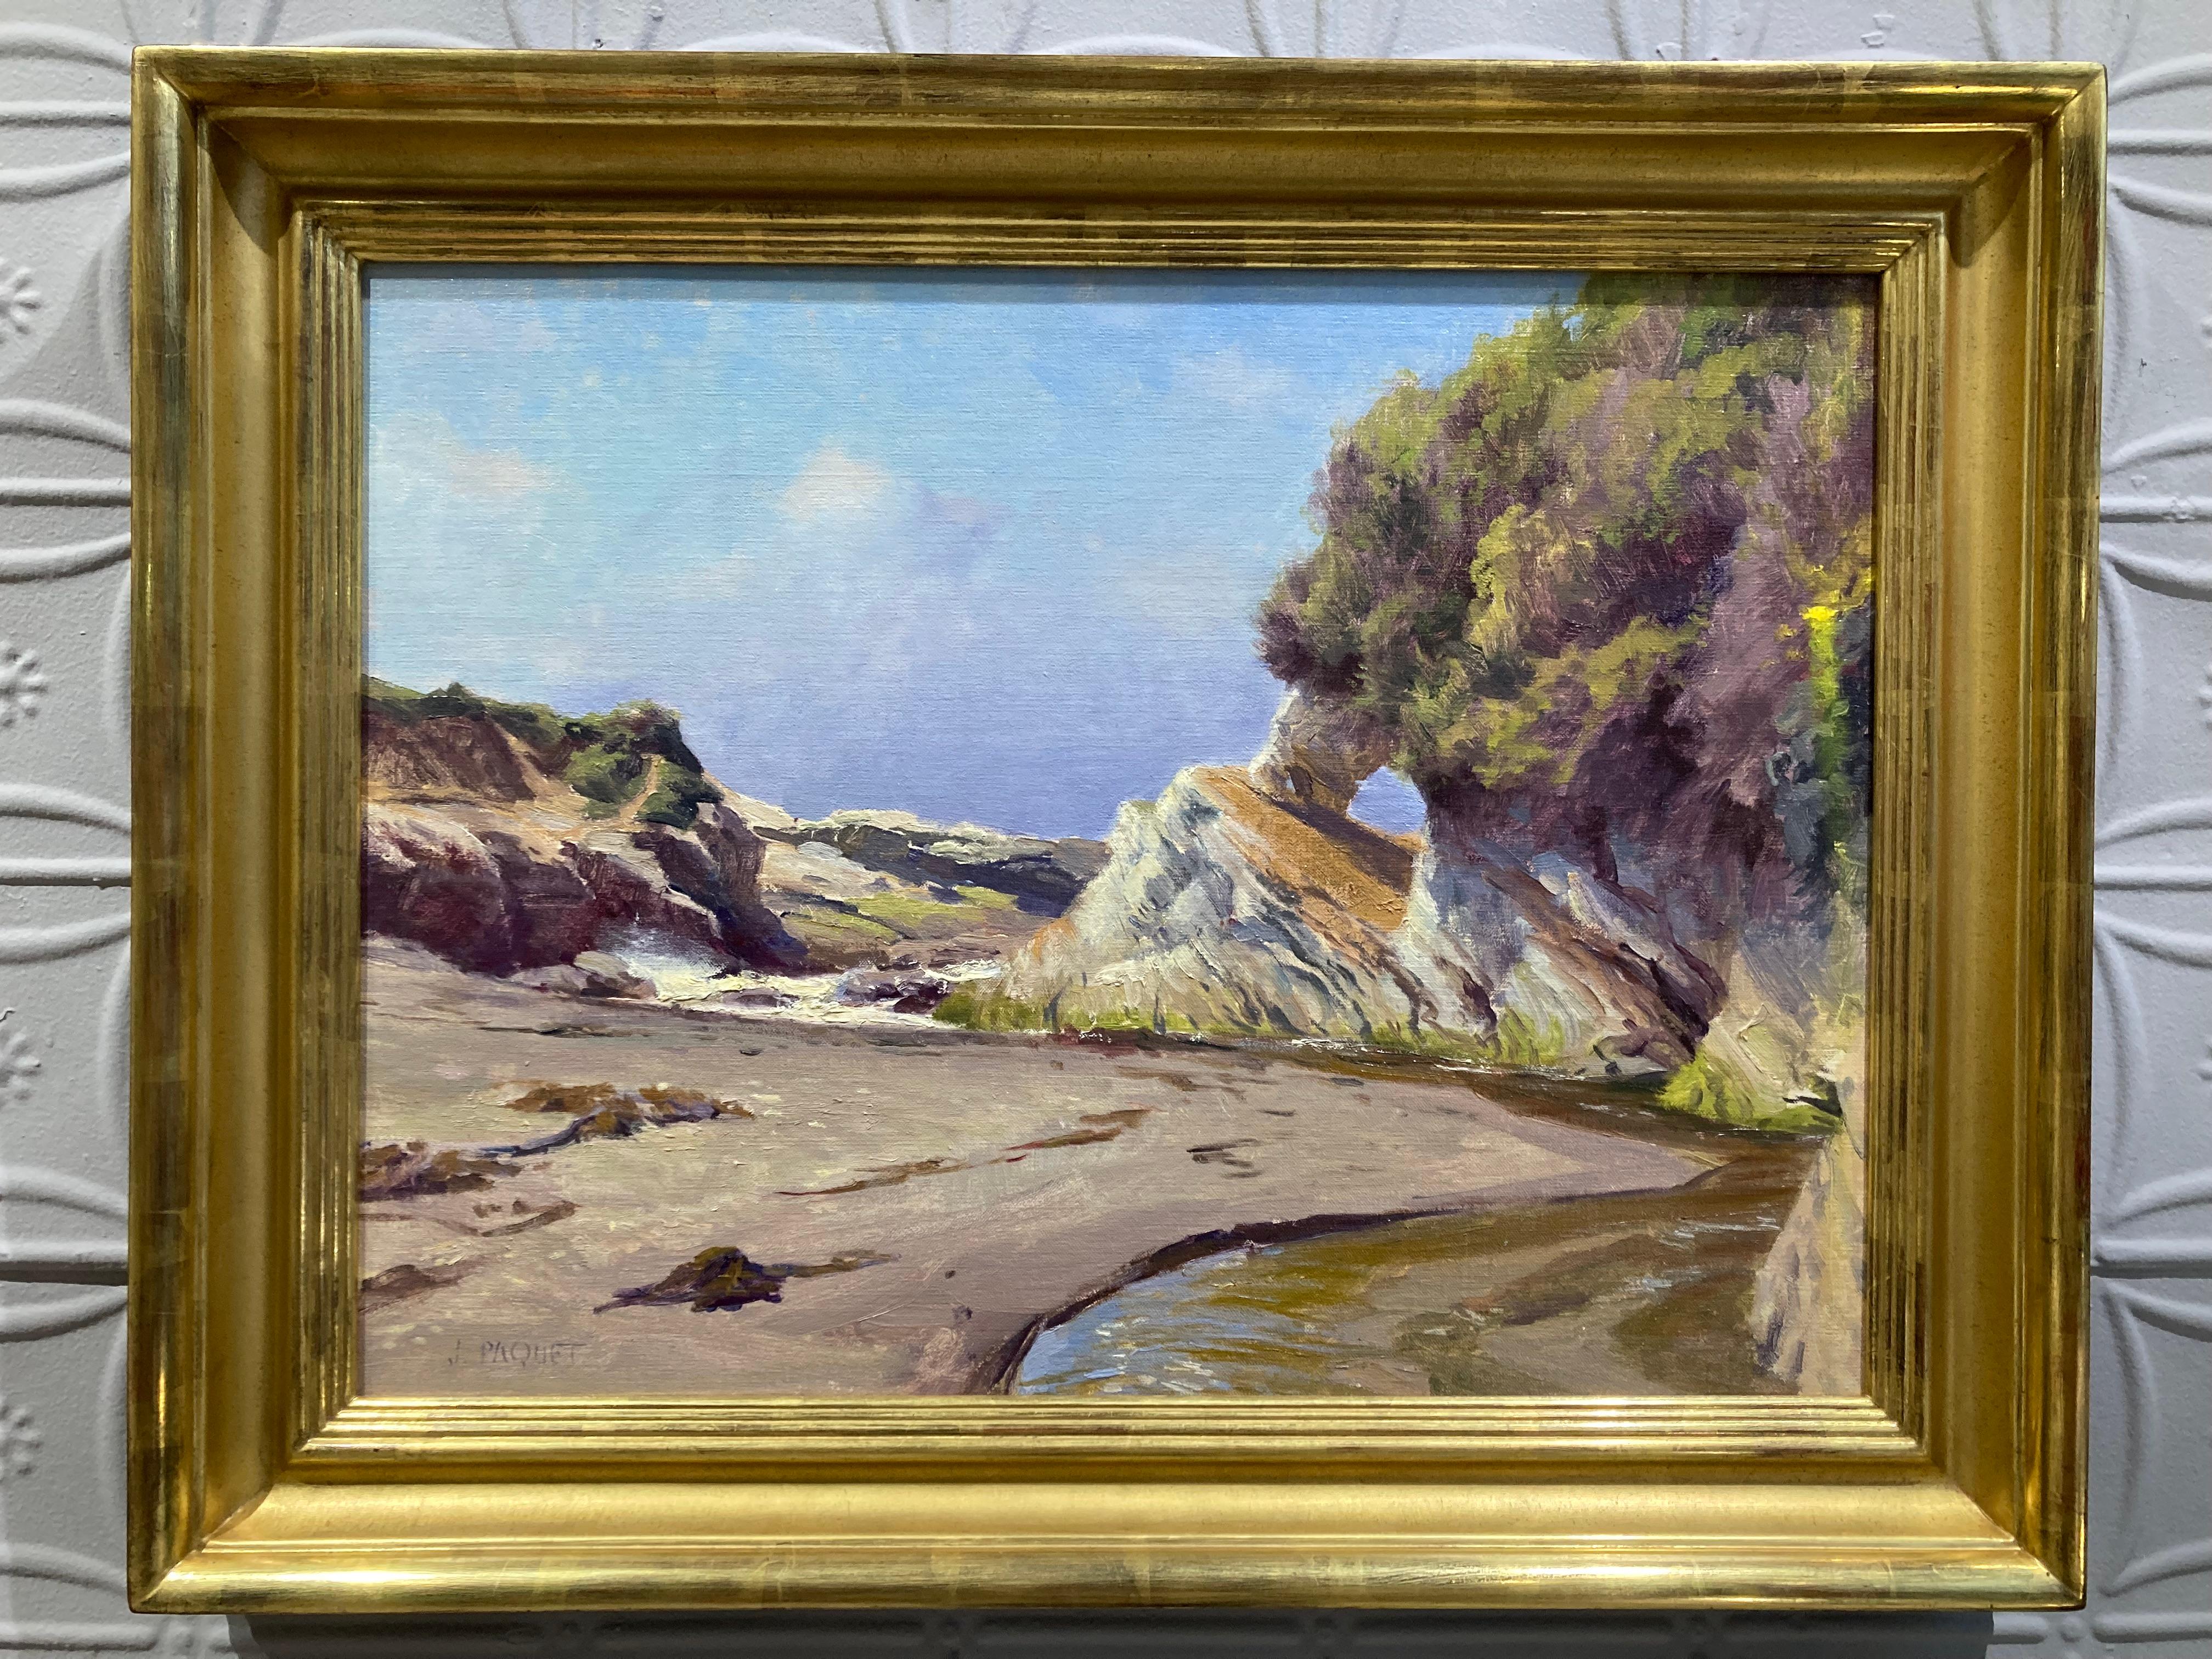 An oil painting of high tide at Spooners Cove, California. 


Artist Bio
Joseph Paquet, while pursuing a Bachelor of Fine Arts at the School of Visual Arts in New York, had the good fortune of finding mentors in artists James McMullan and John Foote